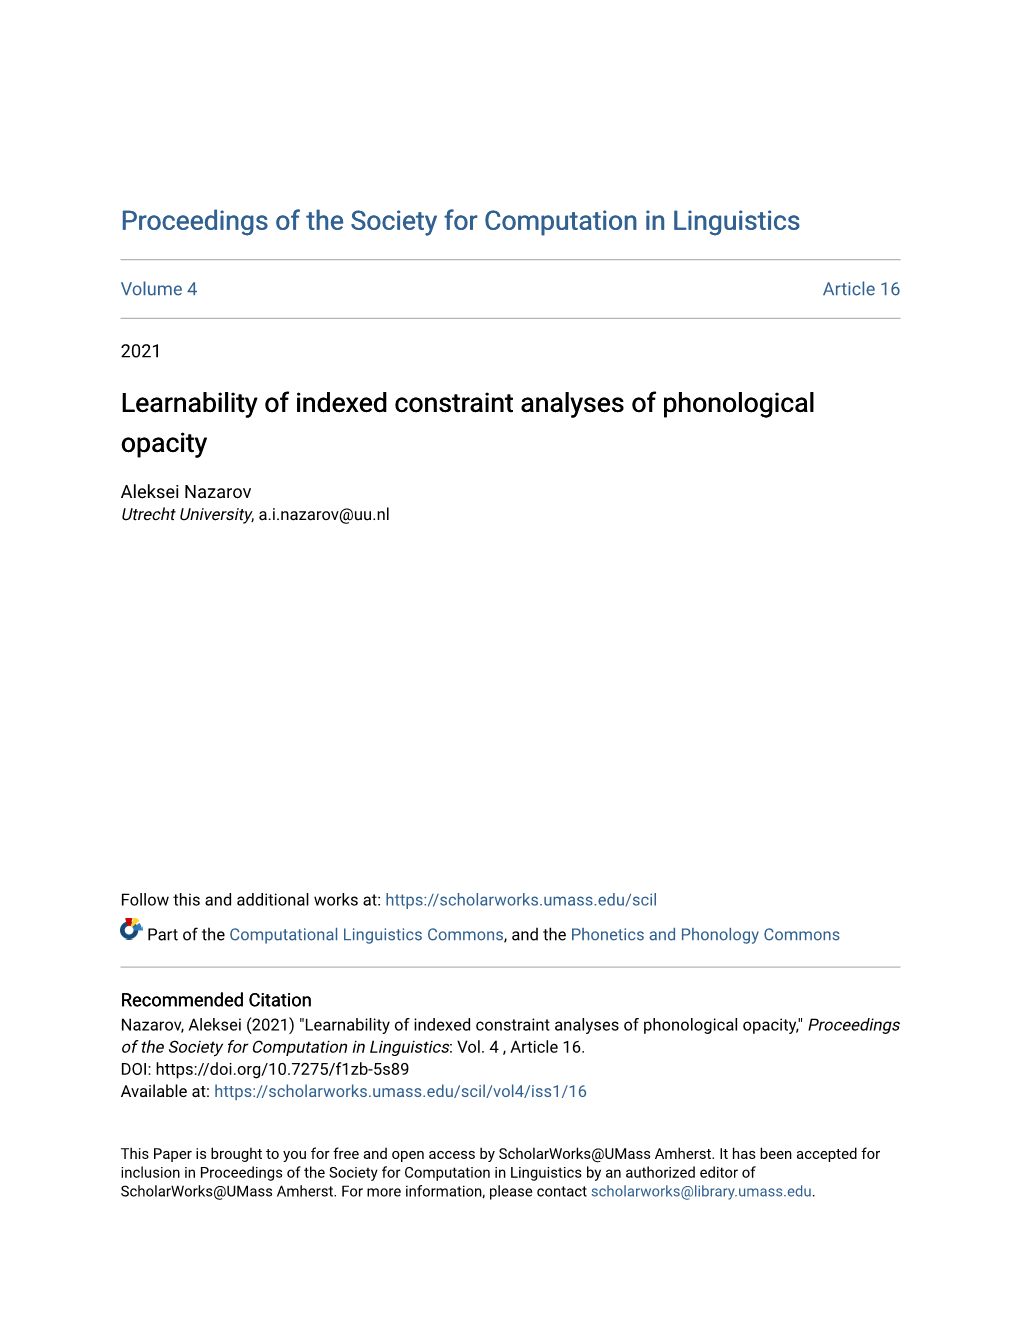 Learnability of Indexed Constraint Analyses of Phonological Opacity